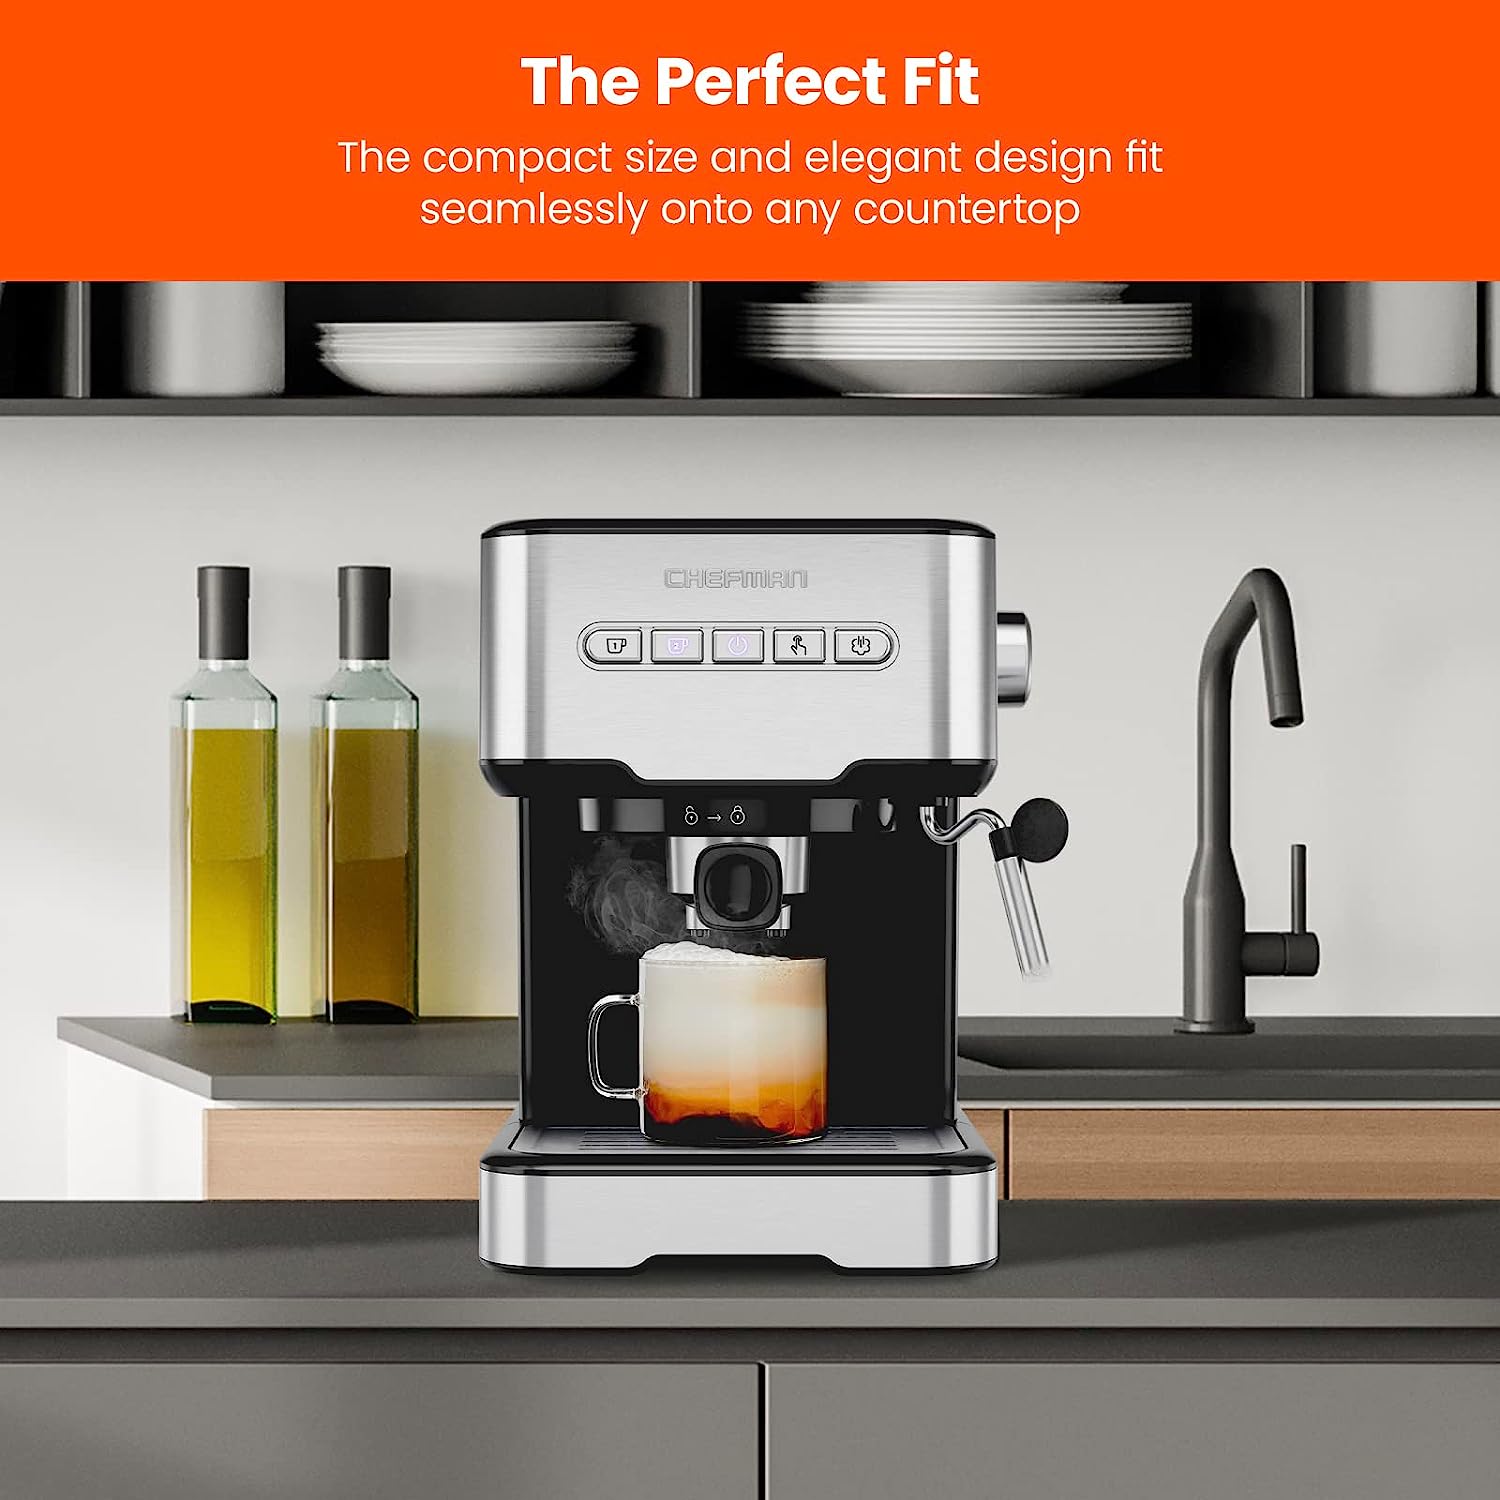 Chefman 6-in-1 Espresso Machine with Built-In Milk Frother, 15-BAR Pump,  Digital Display, One-Touch Single or Double Shot for Cappuccinos and  Lattes